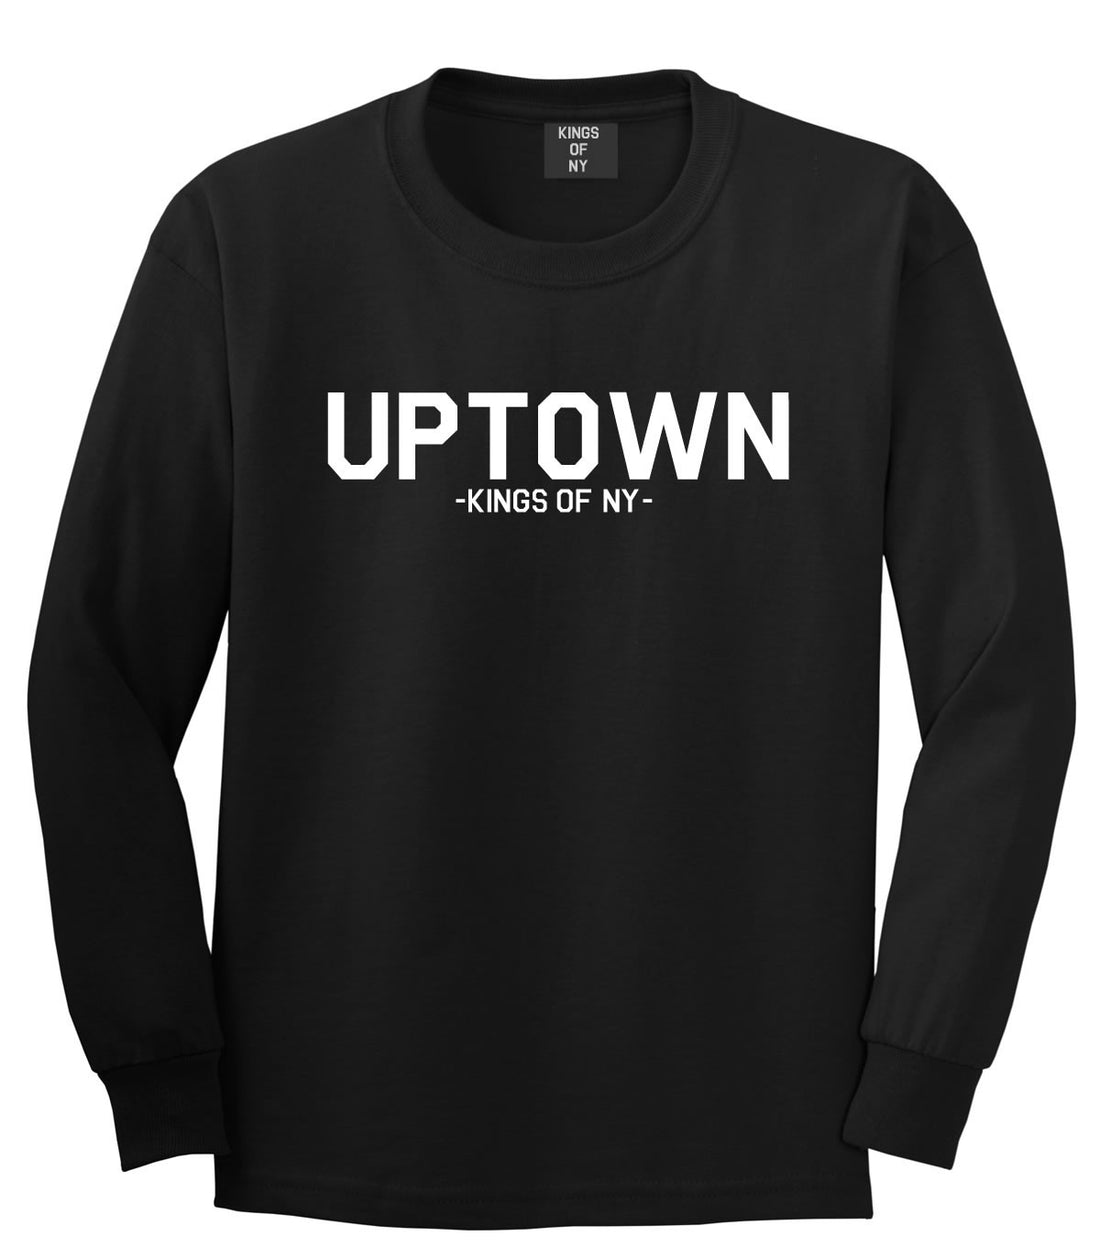 UPTOWN nyc New York Long Sleeve T-Shirt in Black